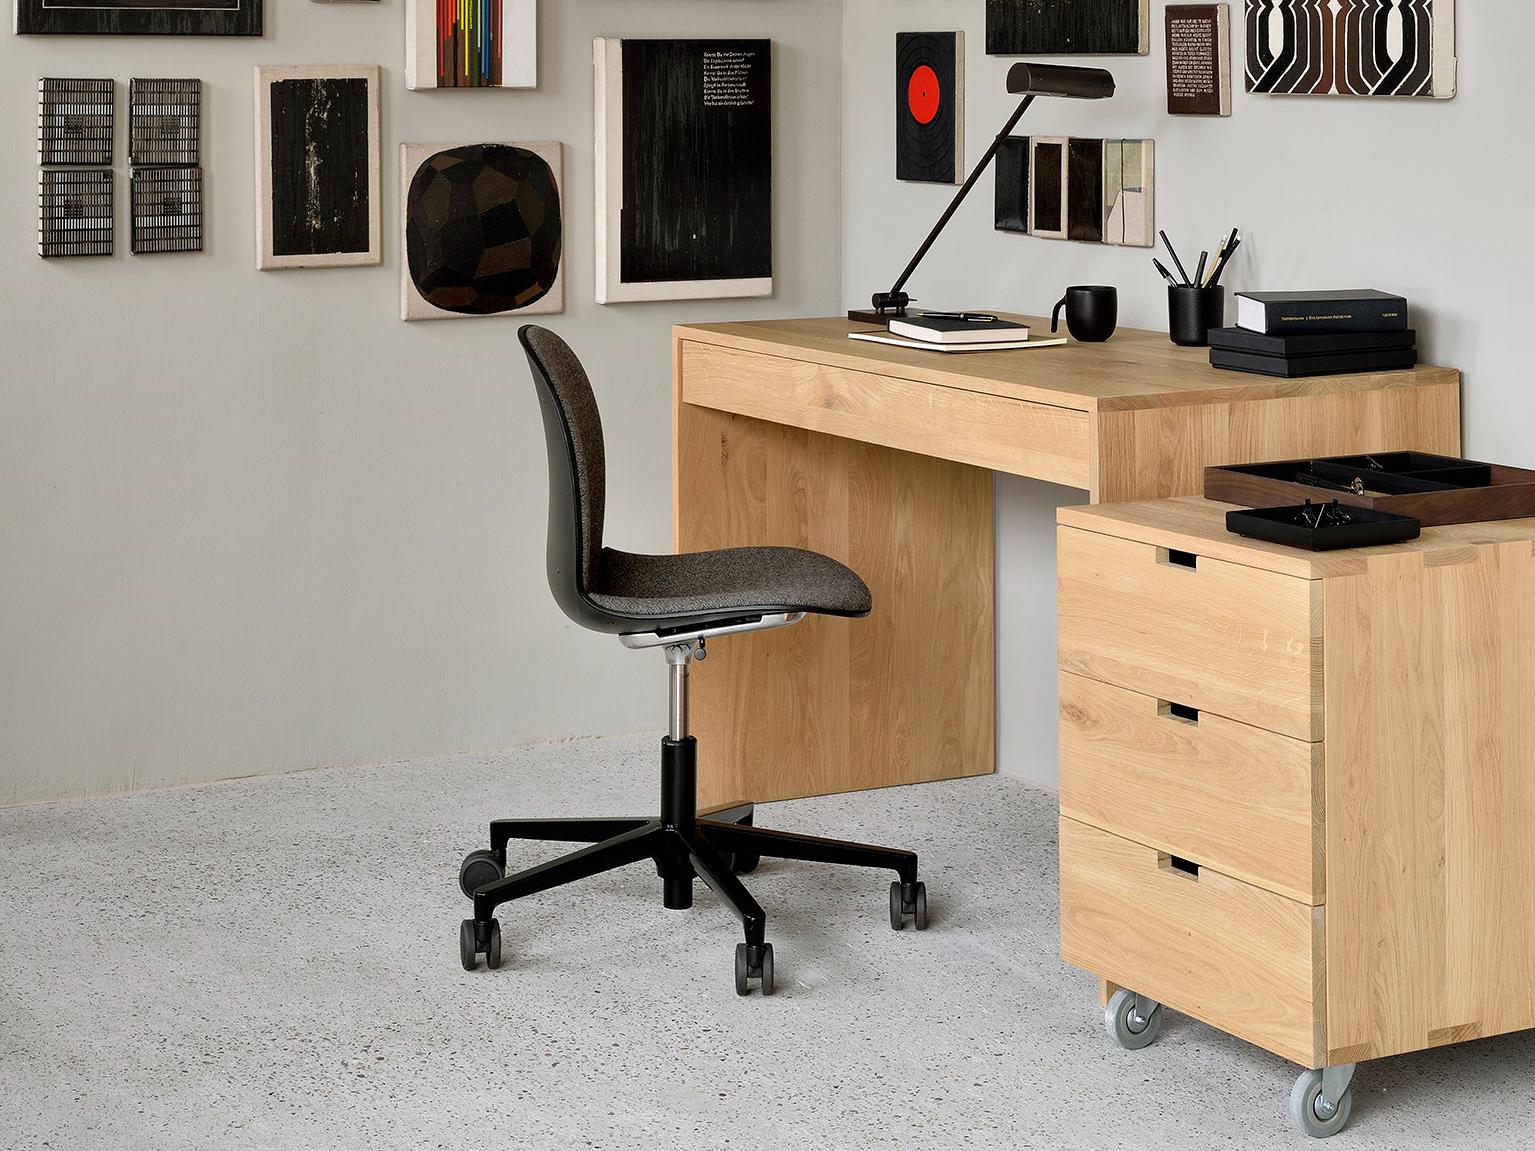 Office Furniture Set with Flokk chair and office desk | Live Light